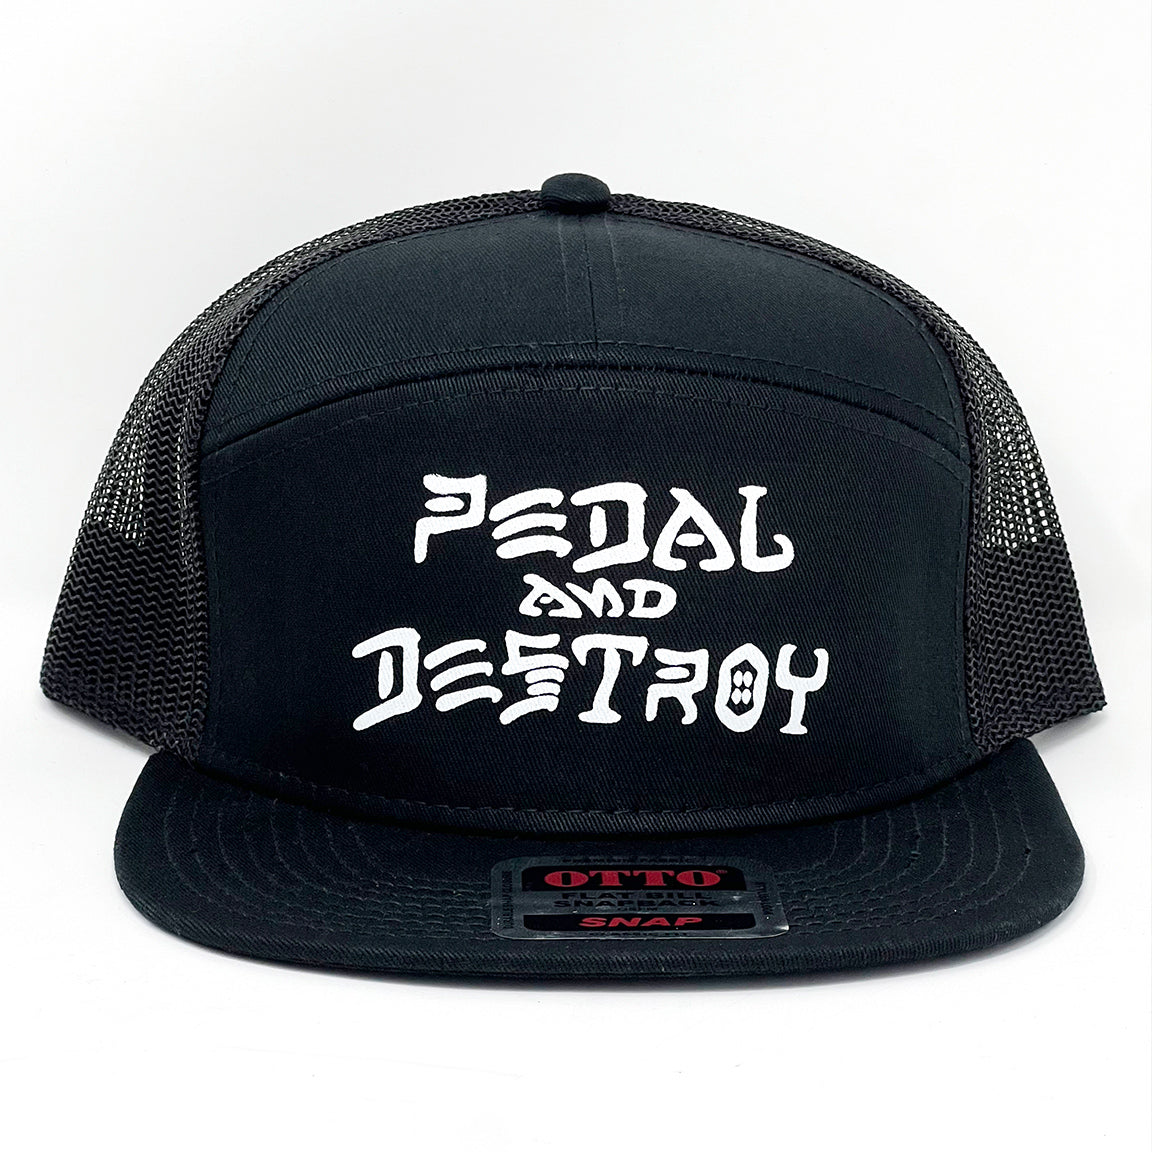 Pedal and Destroy Trucker Hat